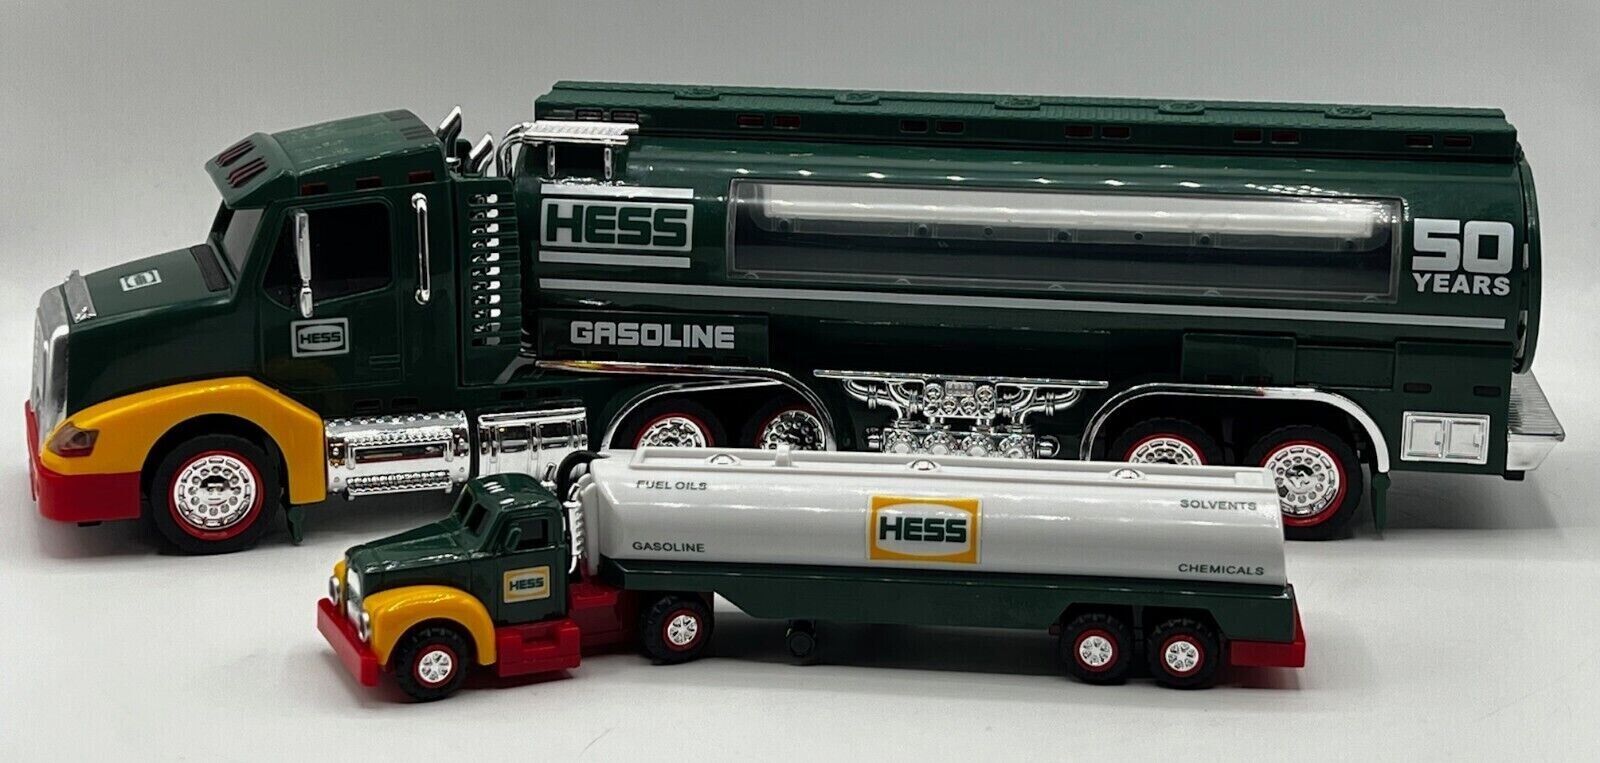 Hess 1964-2014 Limited Edition 50th Anniversary Toy Truck Tanker with Lights